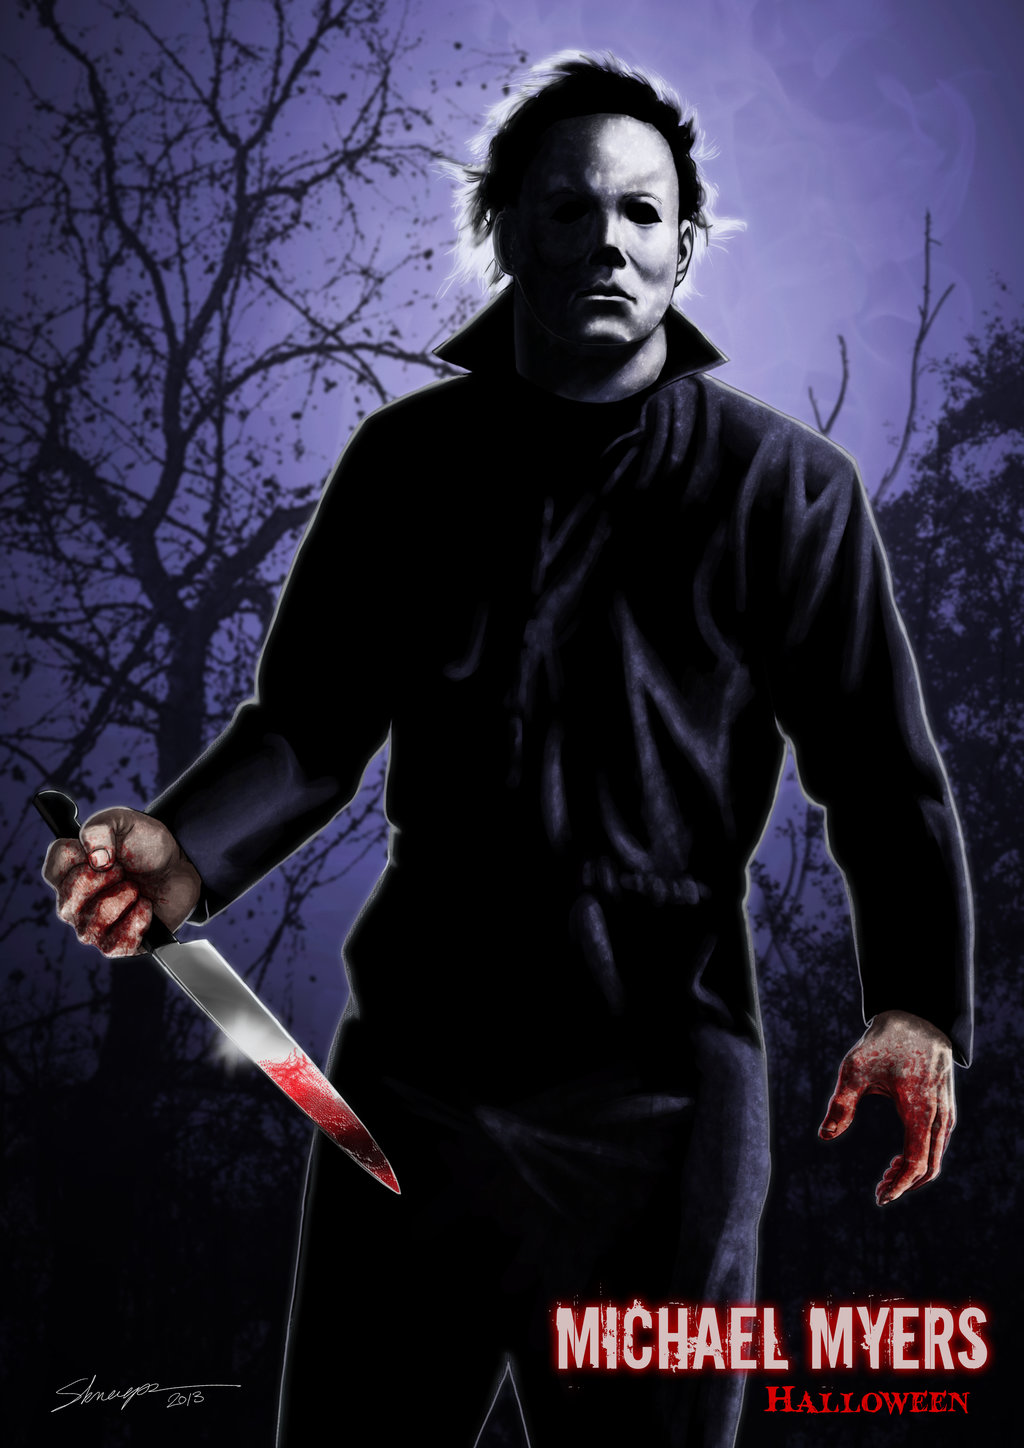 Michael Myers by SaraKpn on